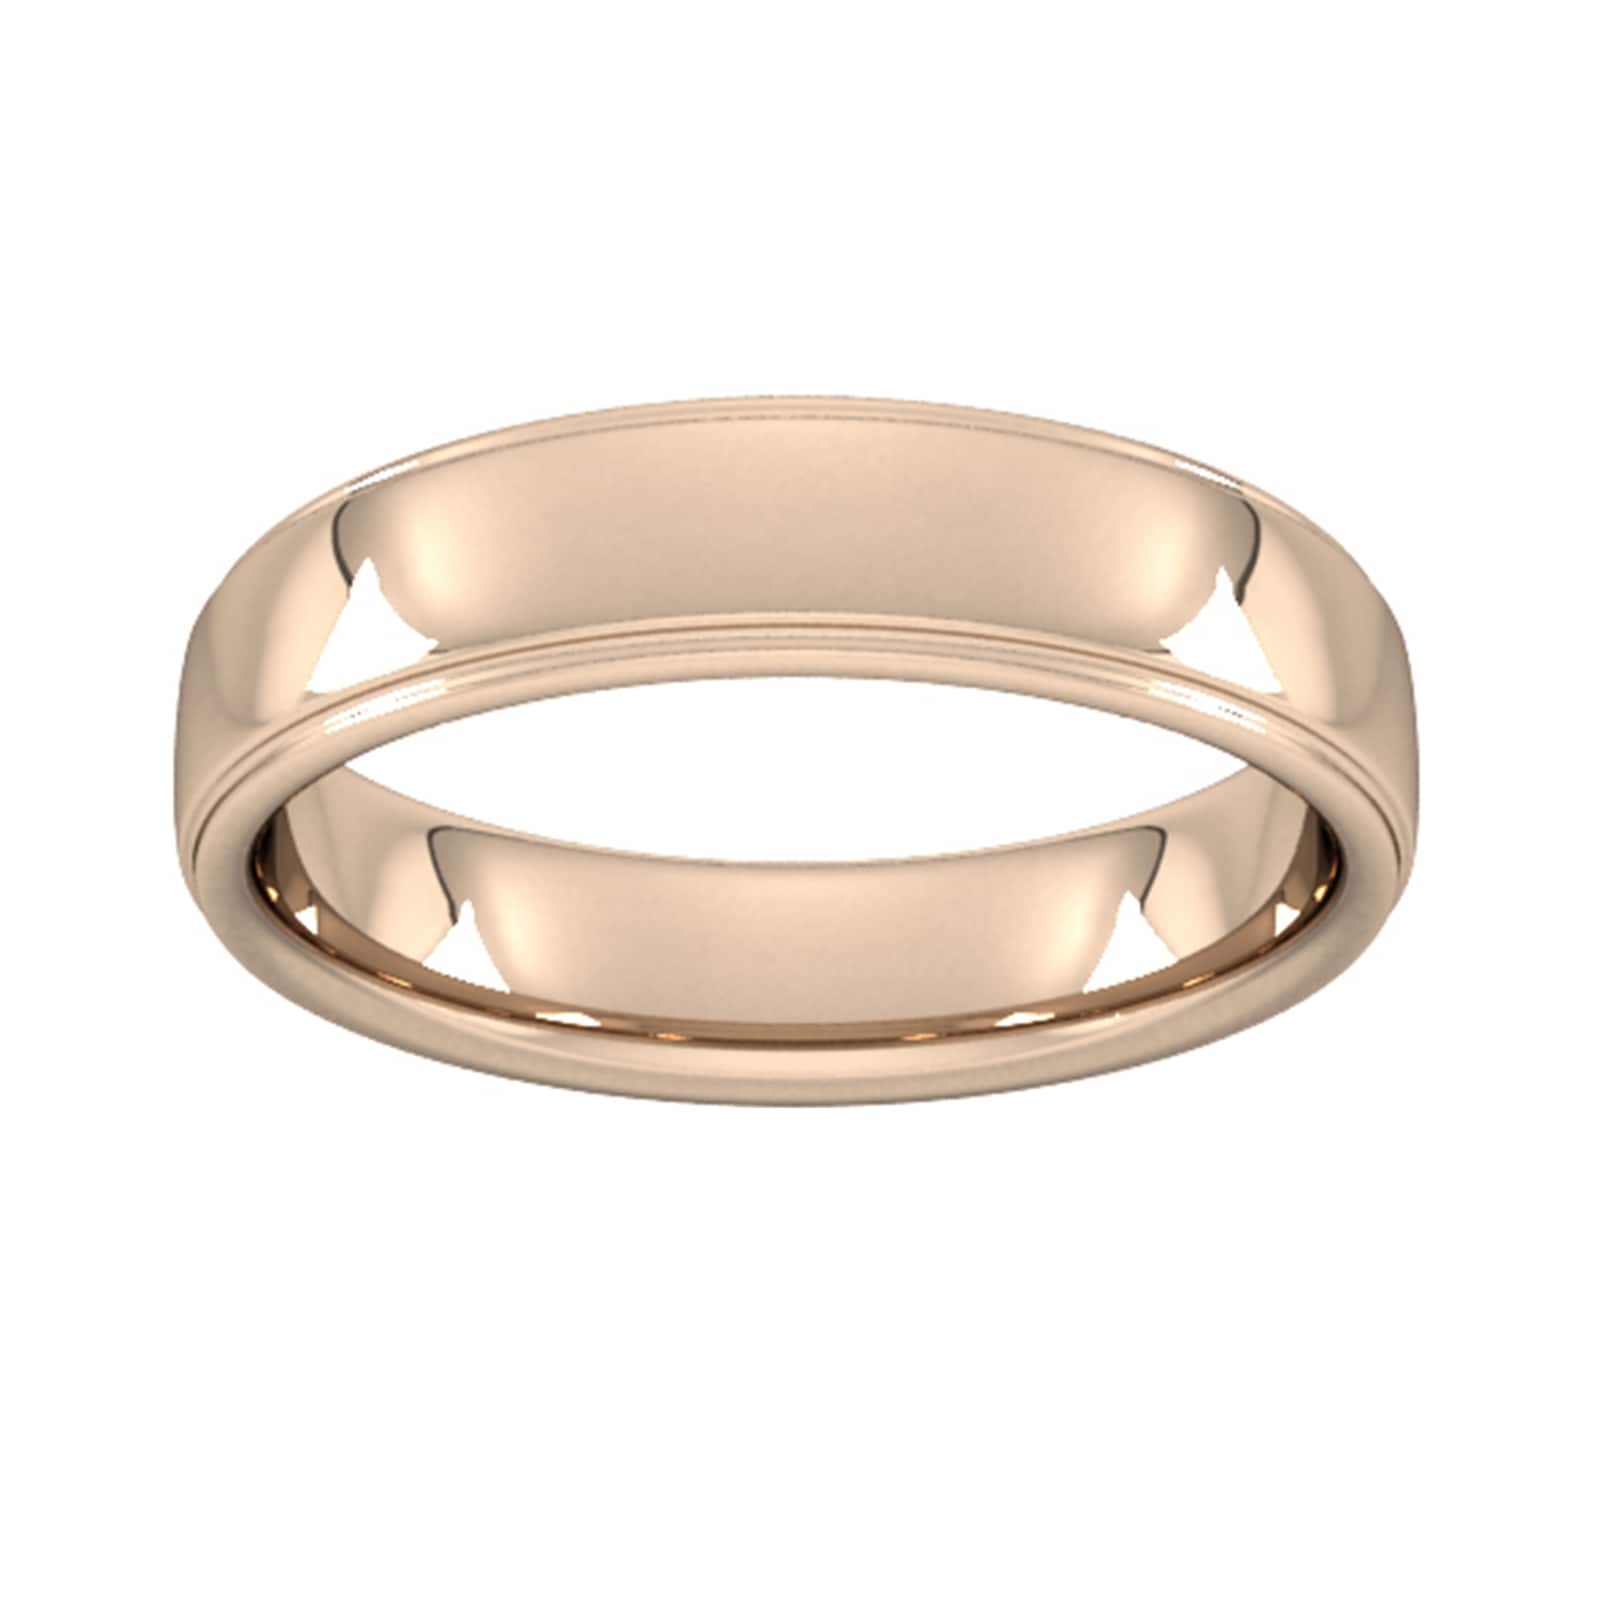 5mm Flat Court Heavy Polished Finish With Grooves Wedding Ring In 9 Carat Rose Gold - Ring Size K